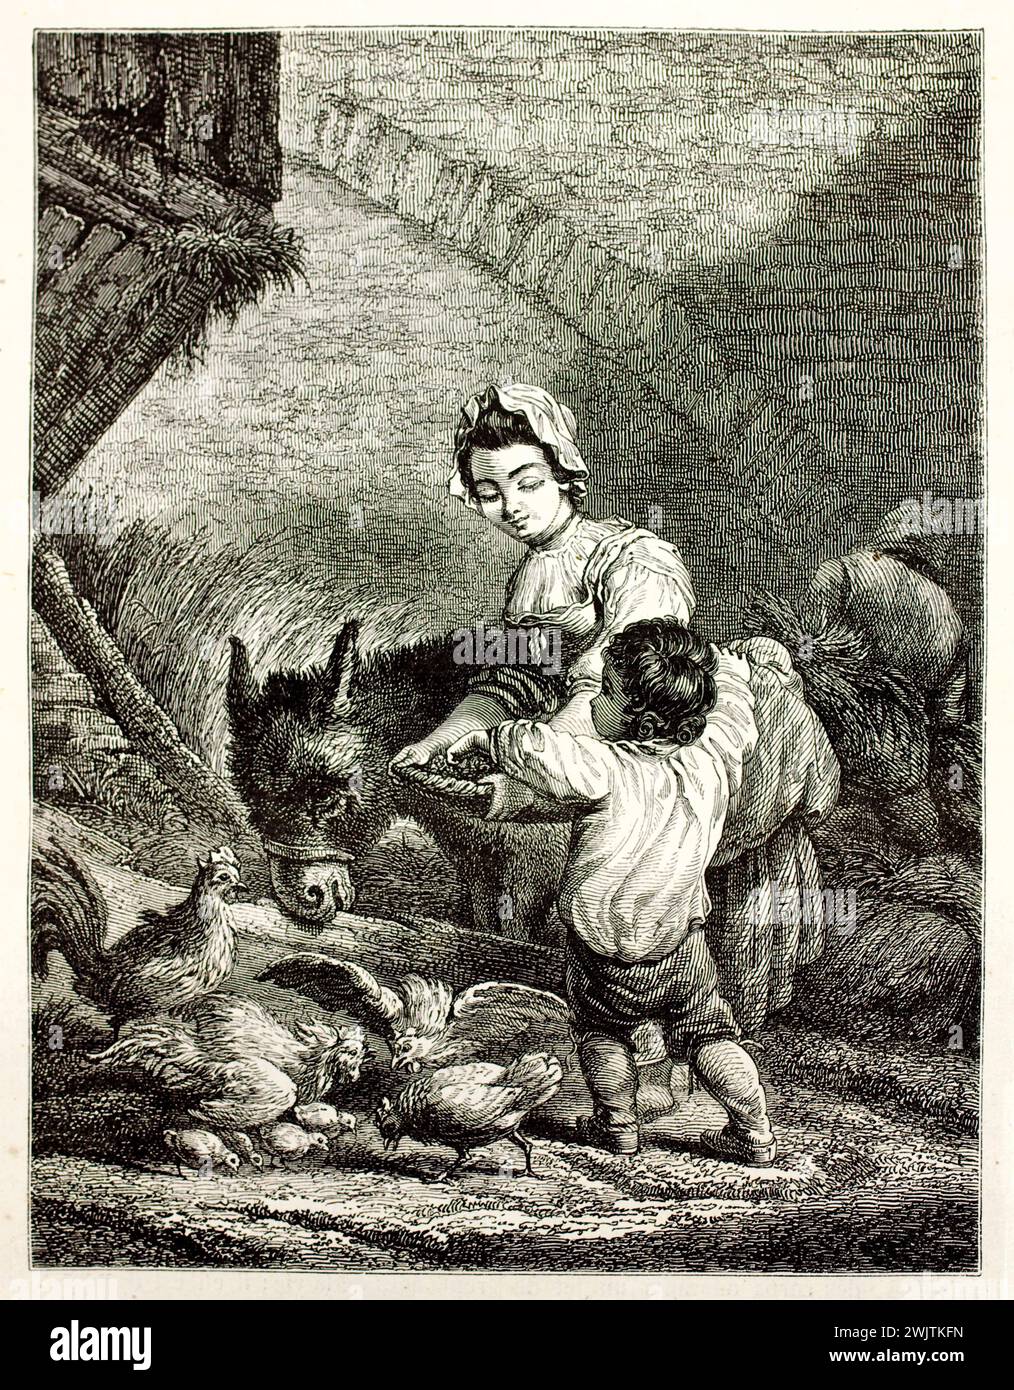 Old engraved illustration of a young paesant girl wirh child and animals. Created by Freeman and Gusman, published on magasin Pittoresque, Paris, 1852 Stock Photo